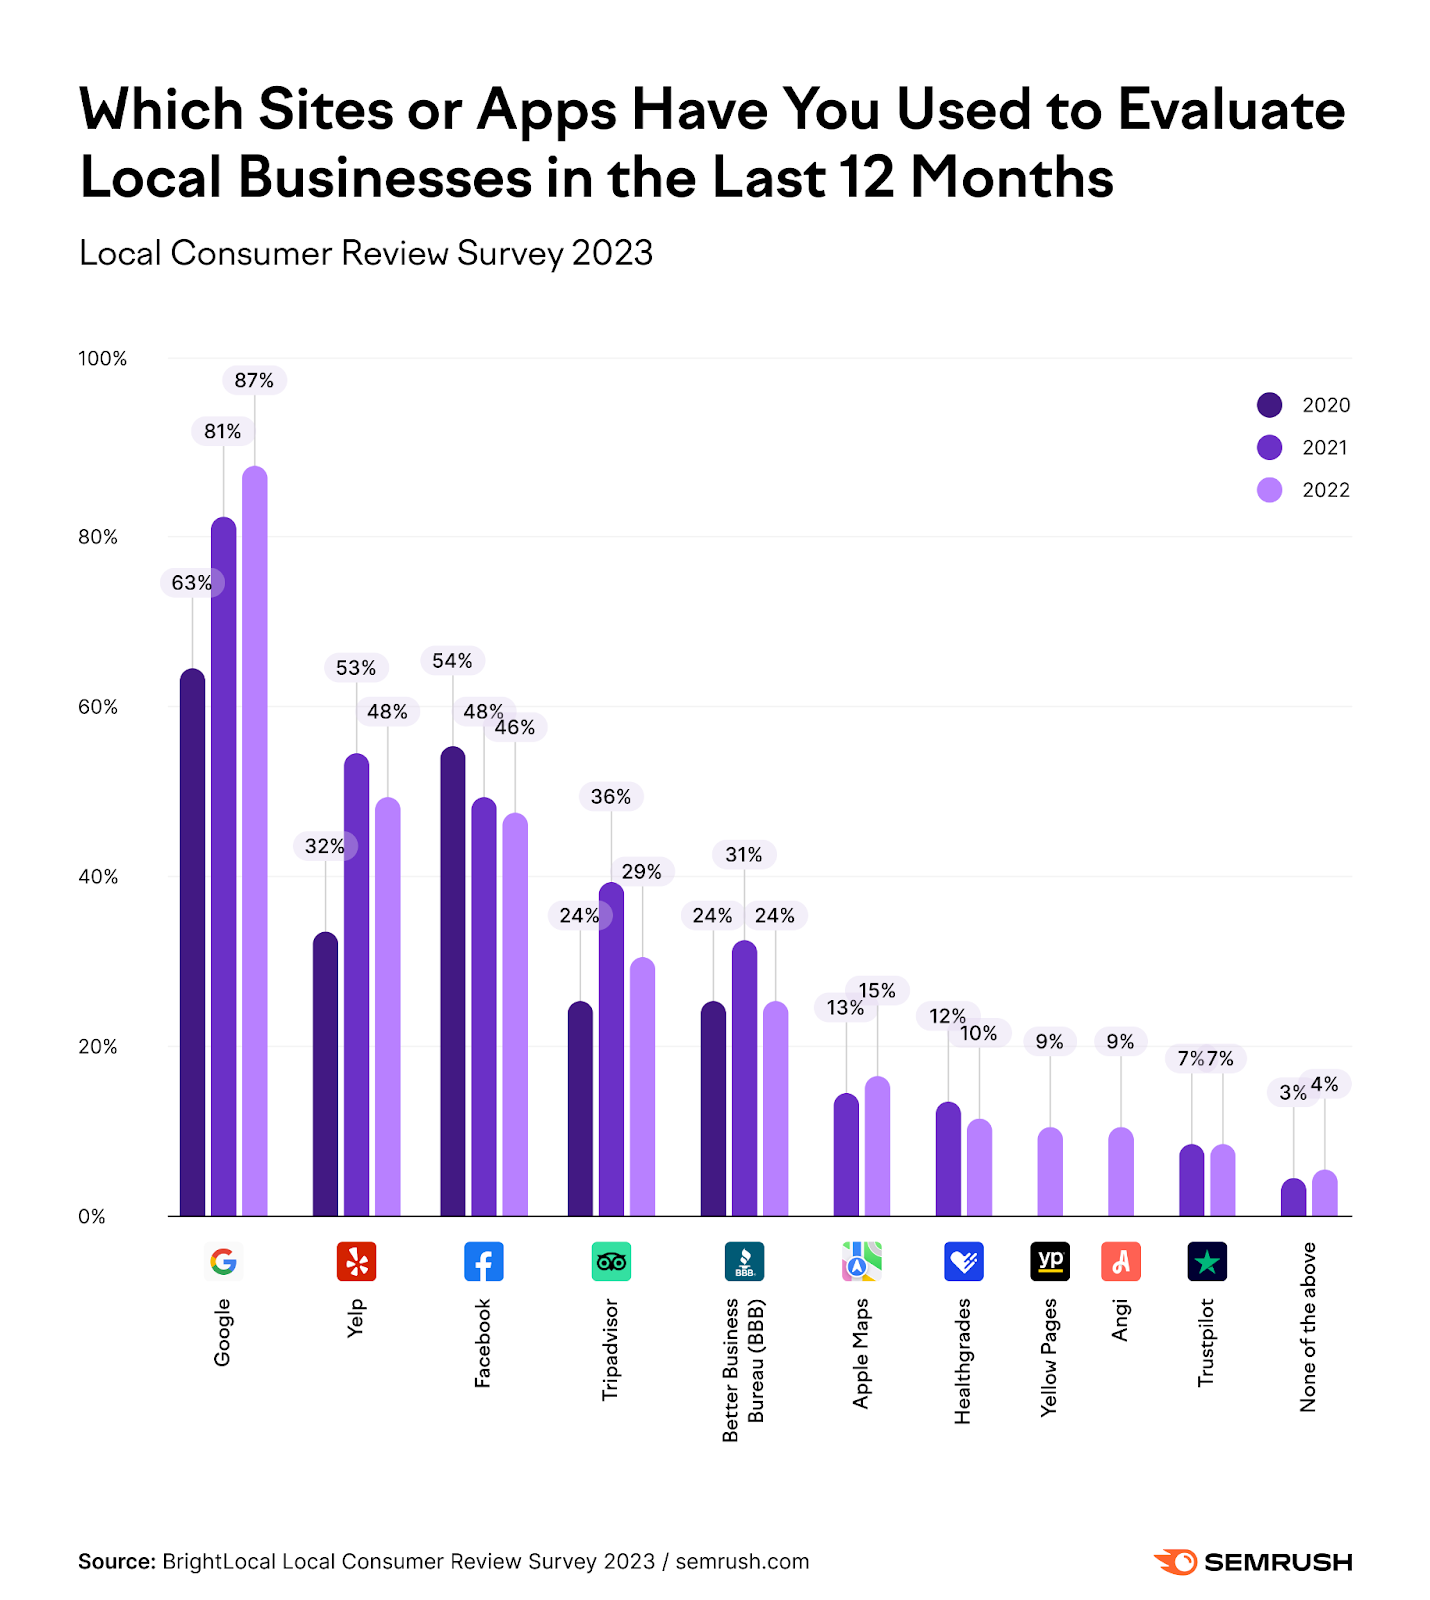 an image from Local Consumer Review 2023 Survey showing responses for "Which sites or apps have you used to evaluate local businesses in the last 12 months"